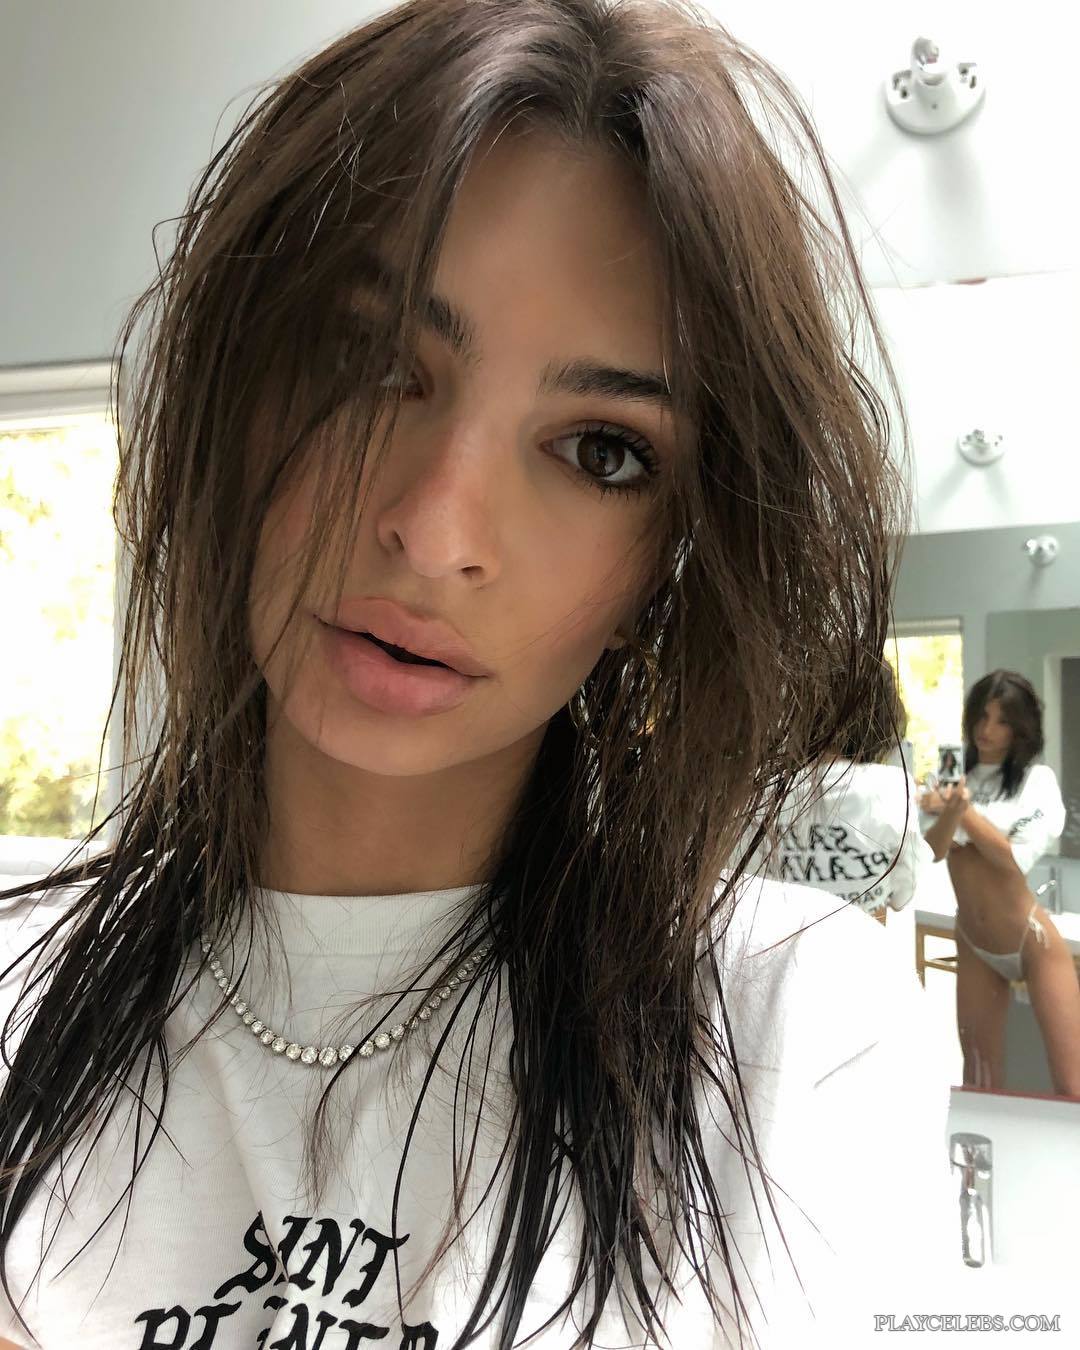 Emily Ratajkowski Topless And Sexy Lingerie Selfie Shots Free Download Nude Photo Gallery 